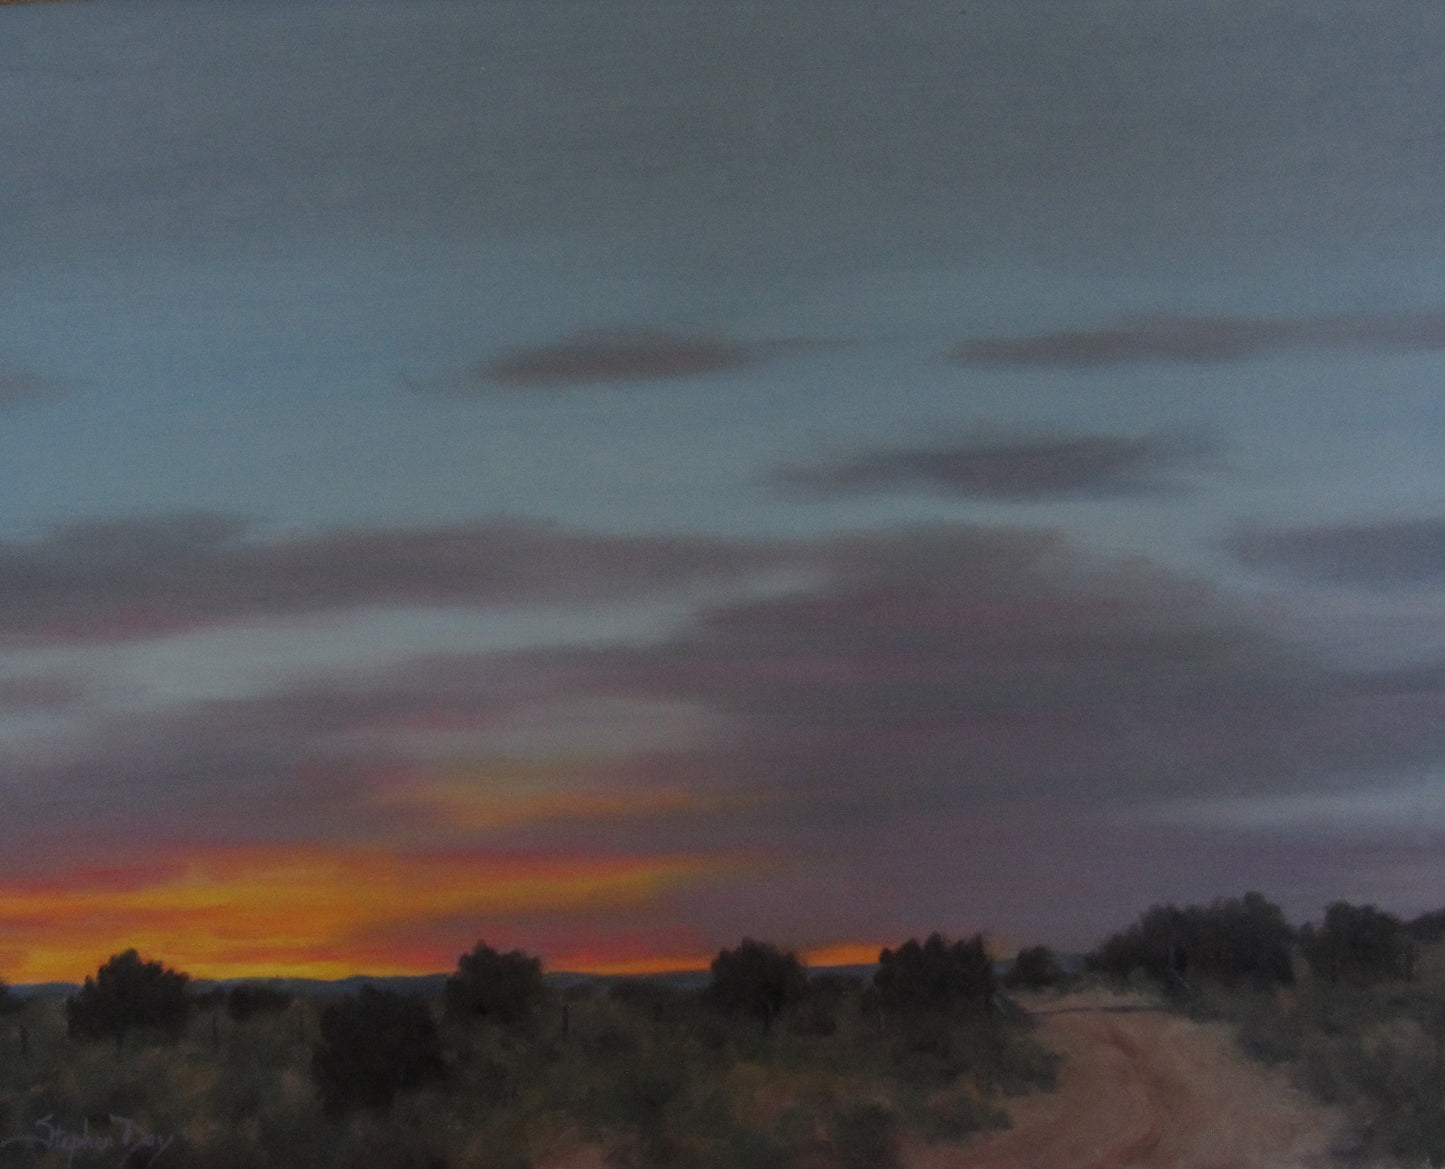 Ranch Gate Evening-Painting-Stephen Day-Sorrel Sky Gallery